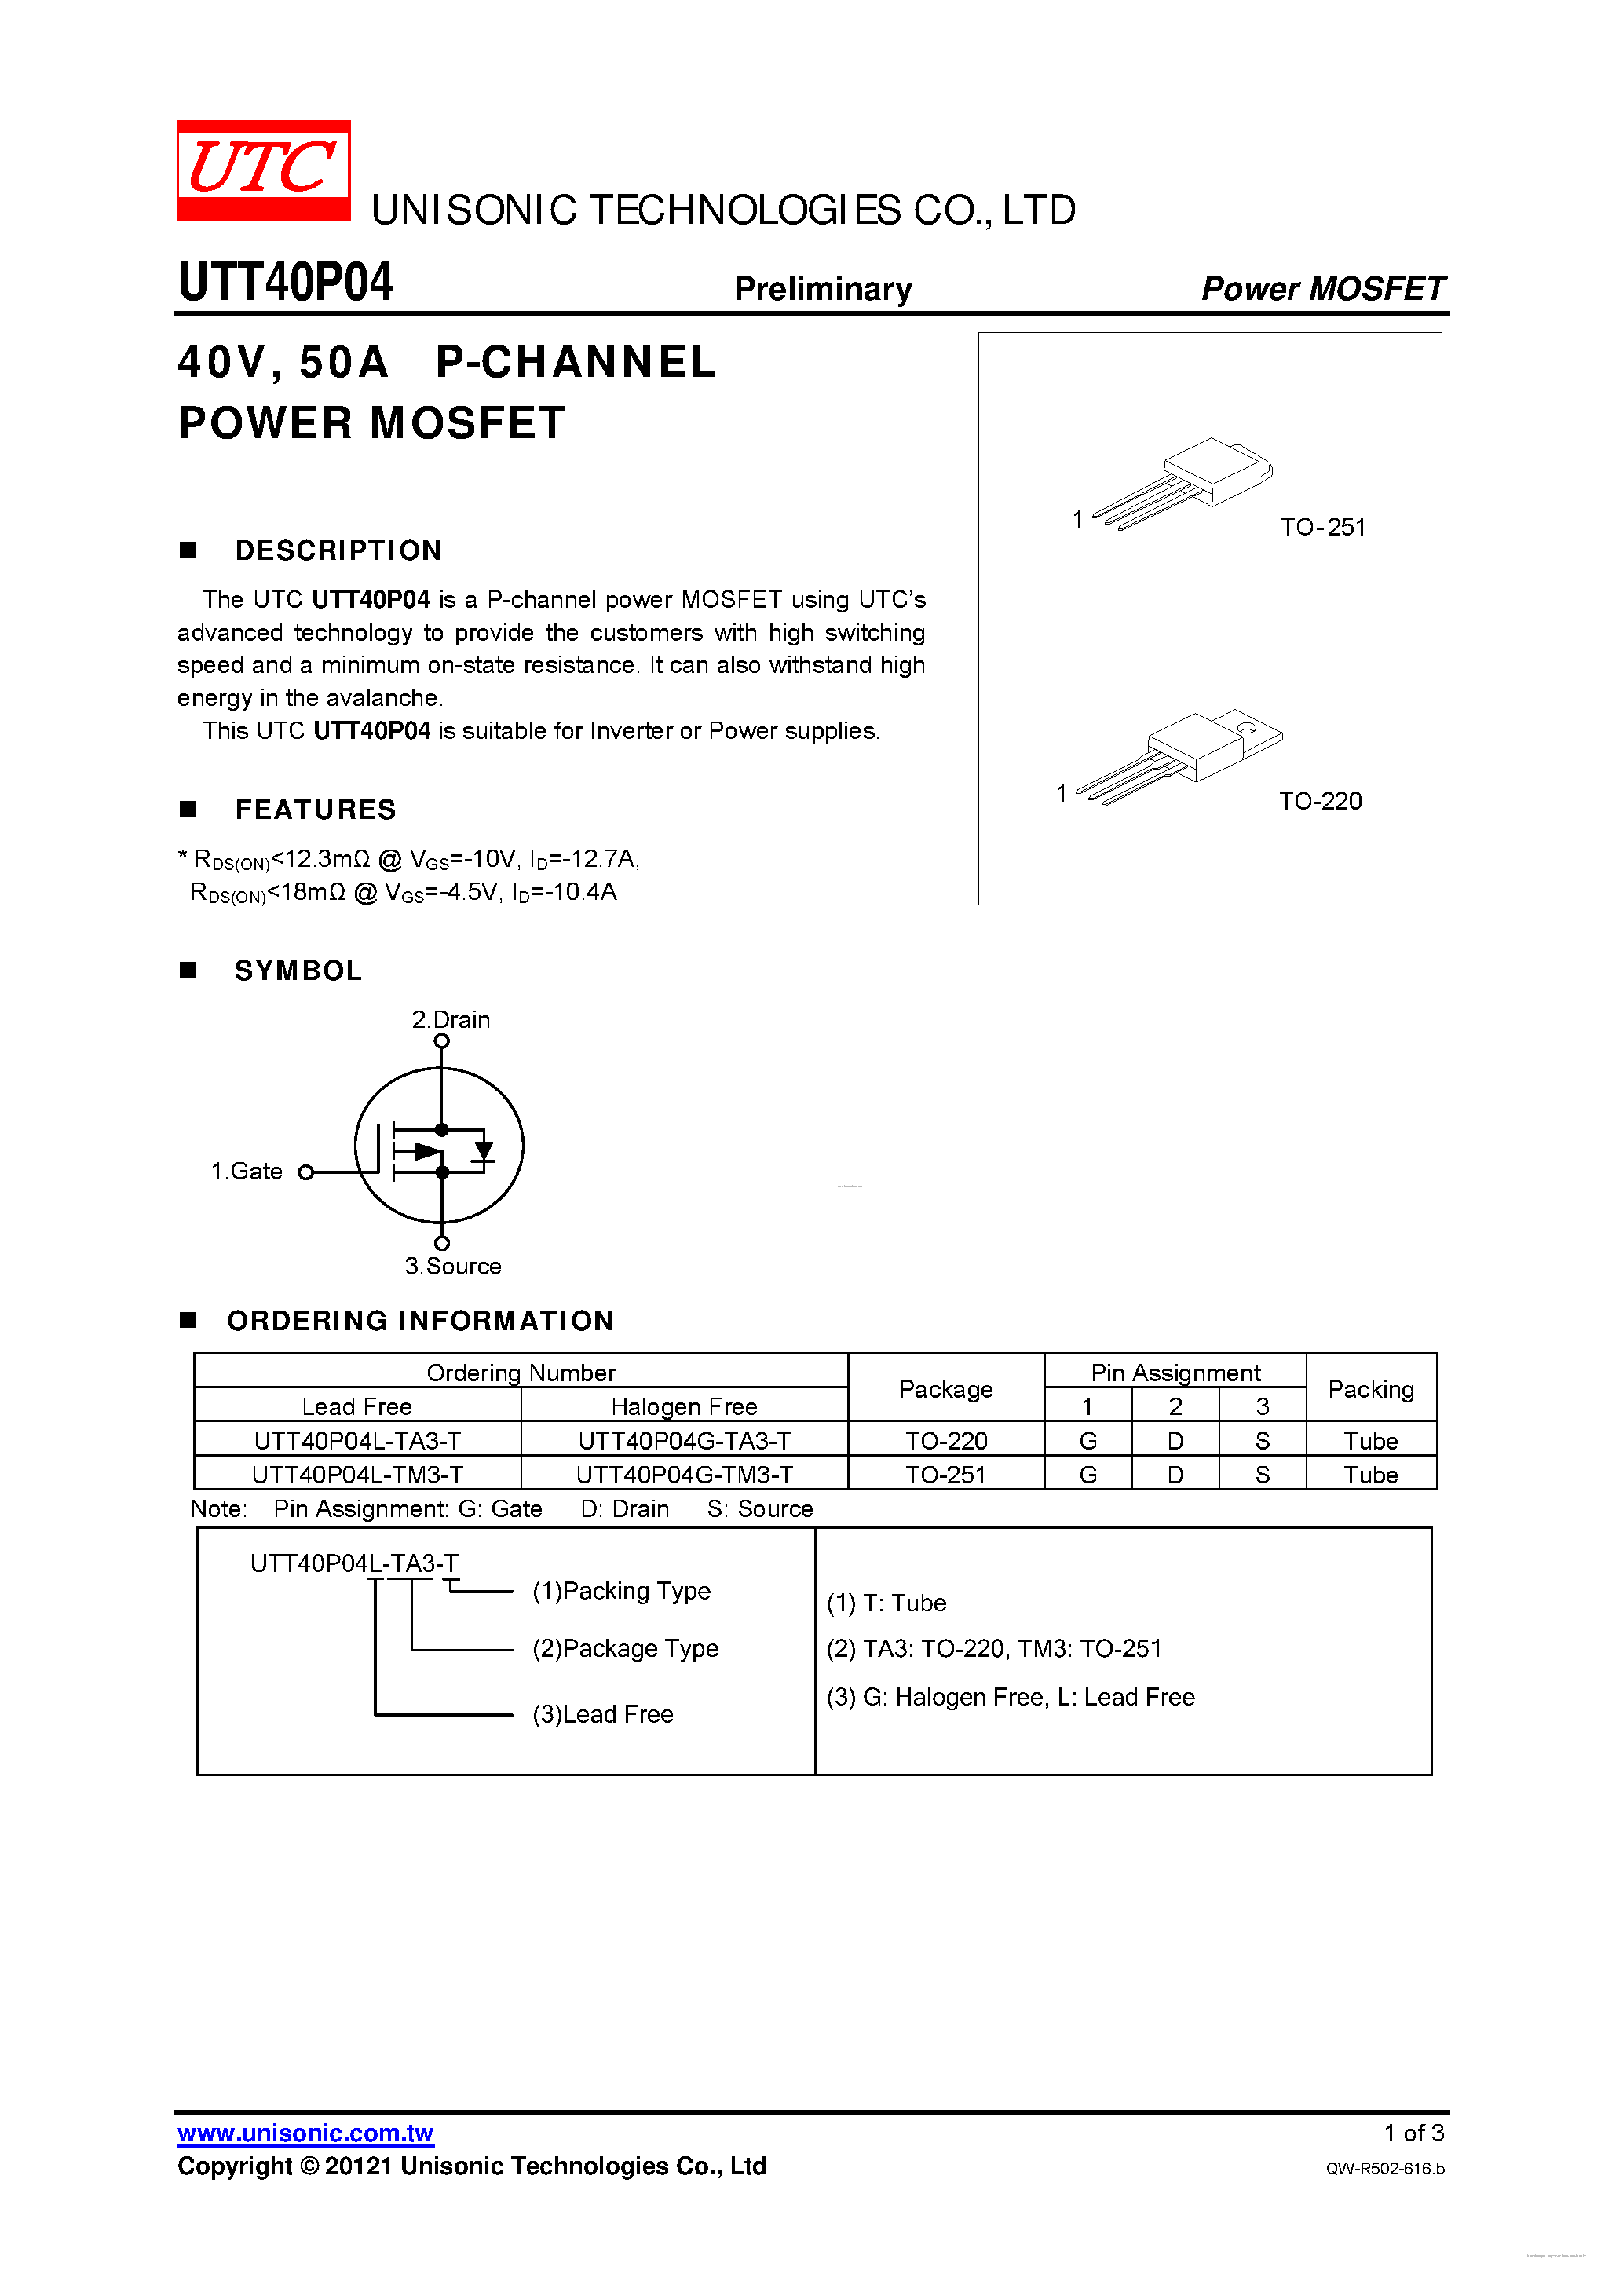 Даташит UTT40P04 - P-CHANNEL POWER MOSFET страница 1